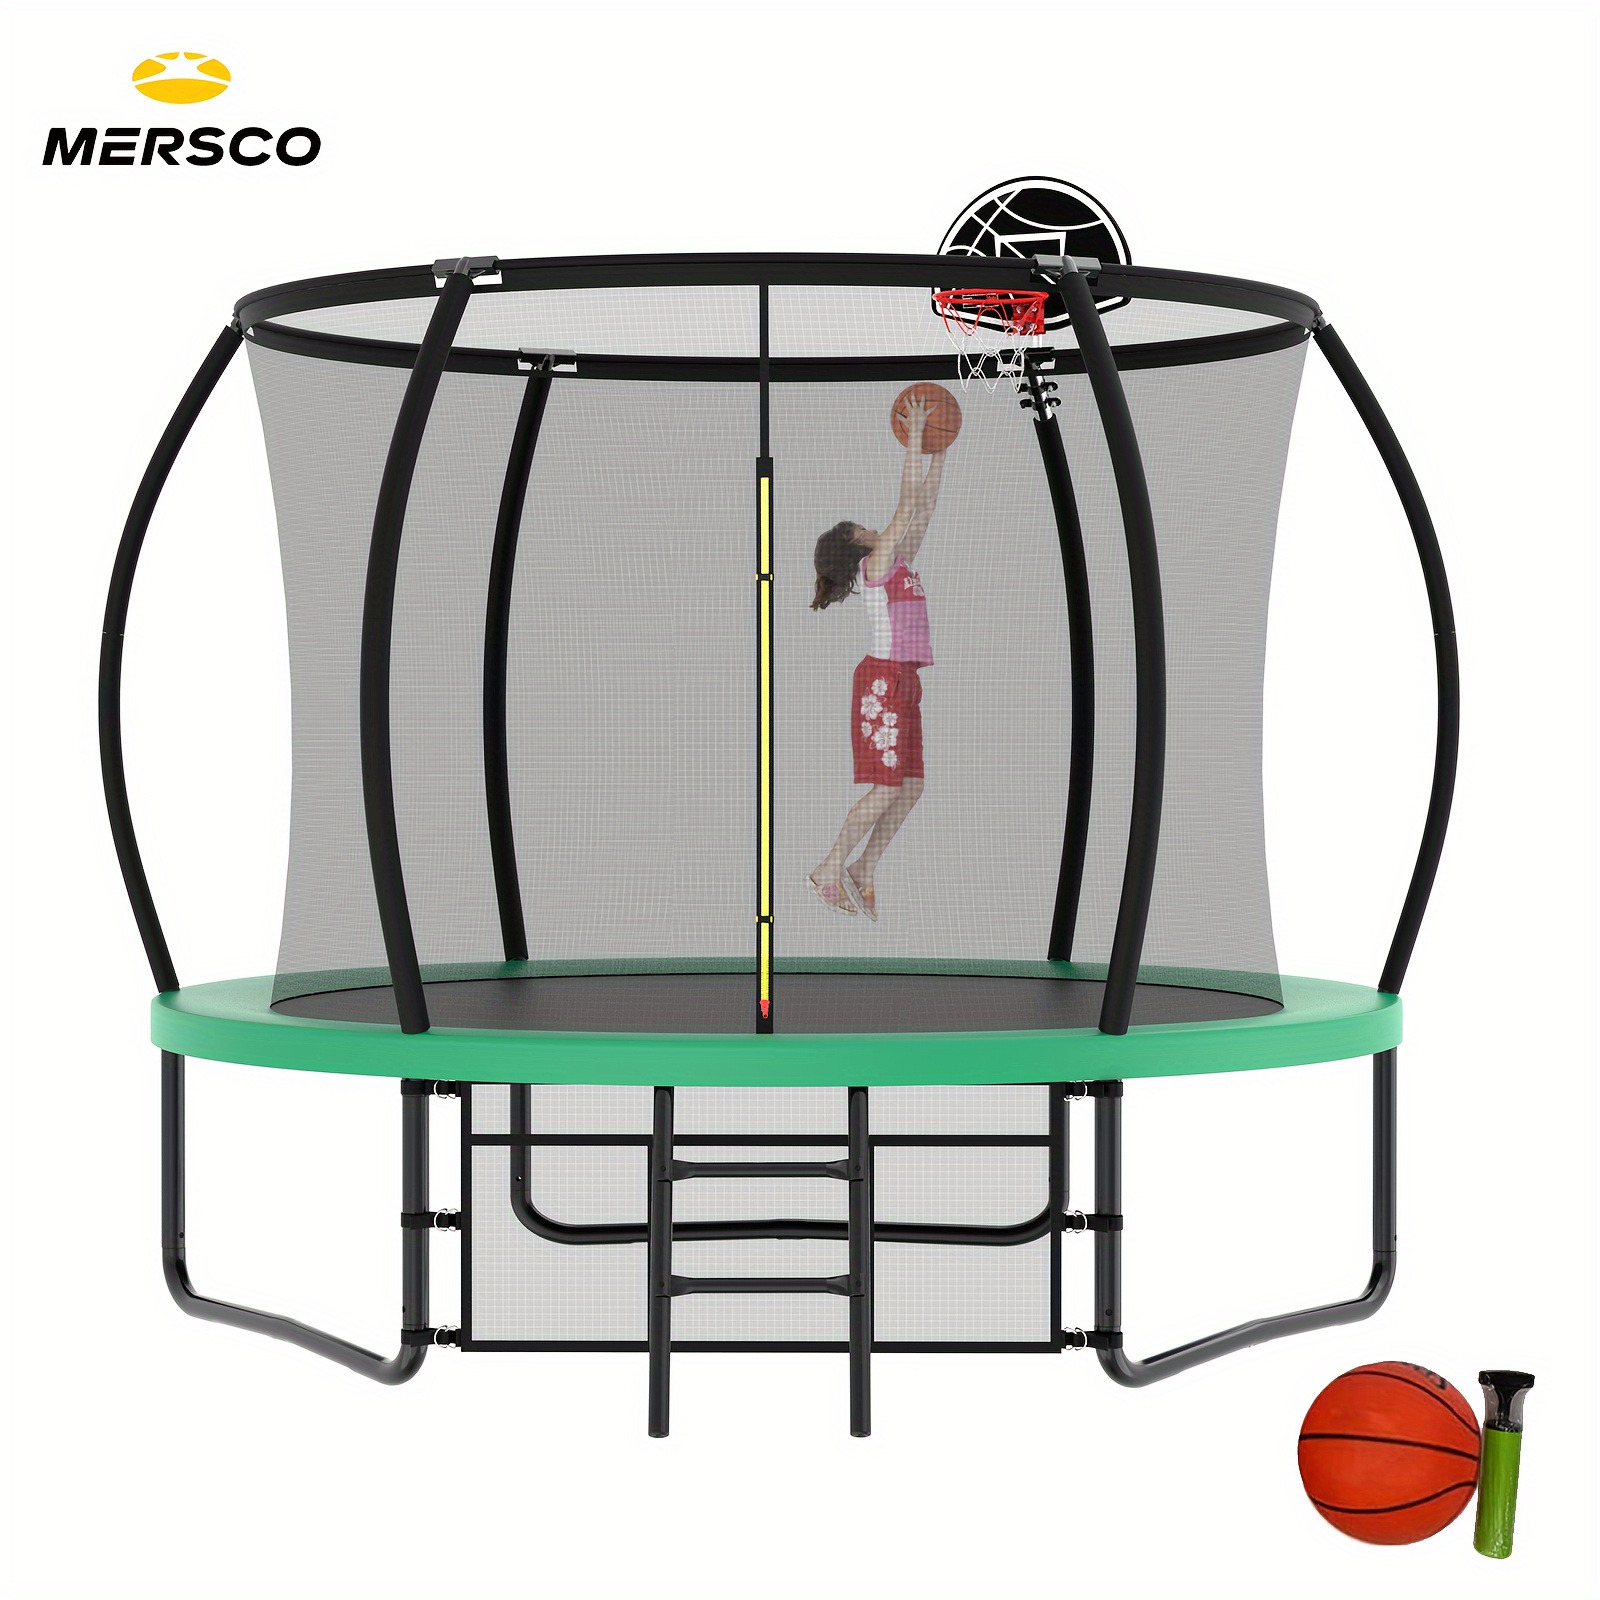 

Mersco 10ft Outdoor Green Trampoline With Basketball Hoop And Ladder, Pumpkin Design Recreational Trampoline With Safety Enclosure And Antirust Coating - 2024 Upgraded, As Halloween Gift